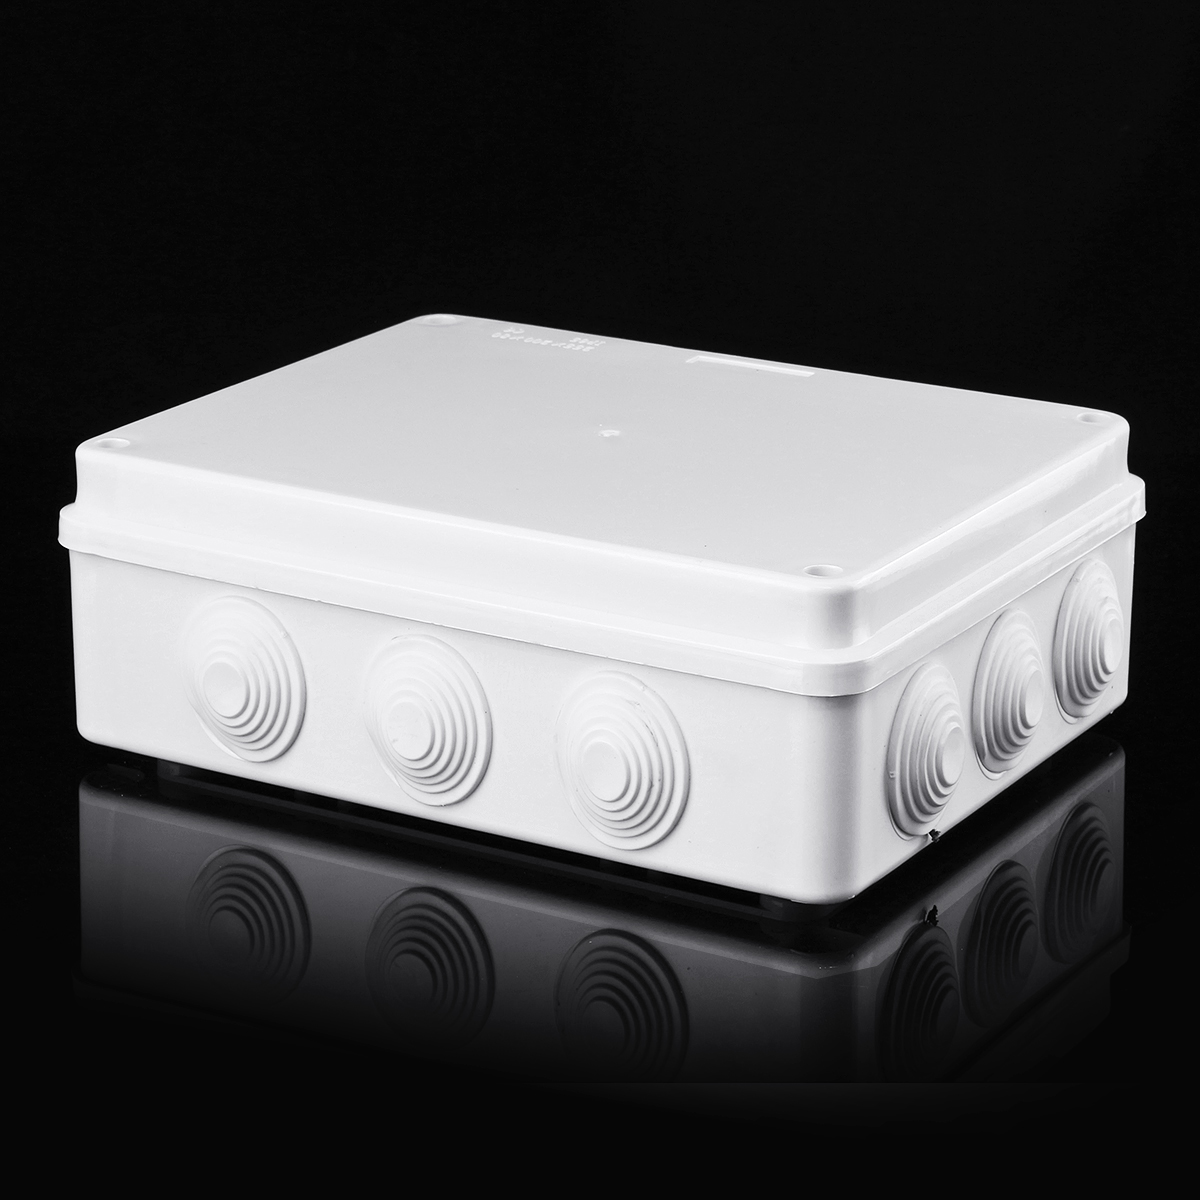 ABS-IP65-Large-Waterproof-Junction-Box-Universal-Electrical-Tool-Enclosure-Cable-Case-1543728-5